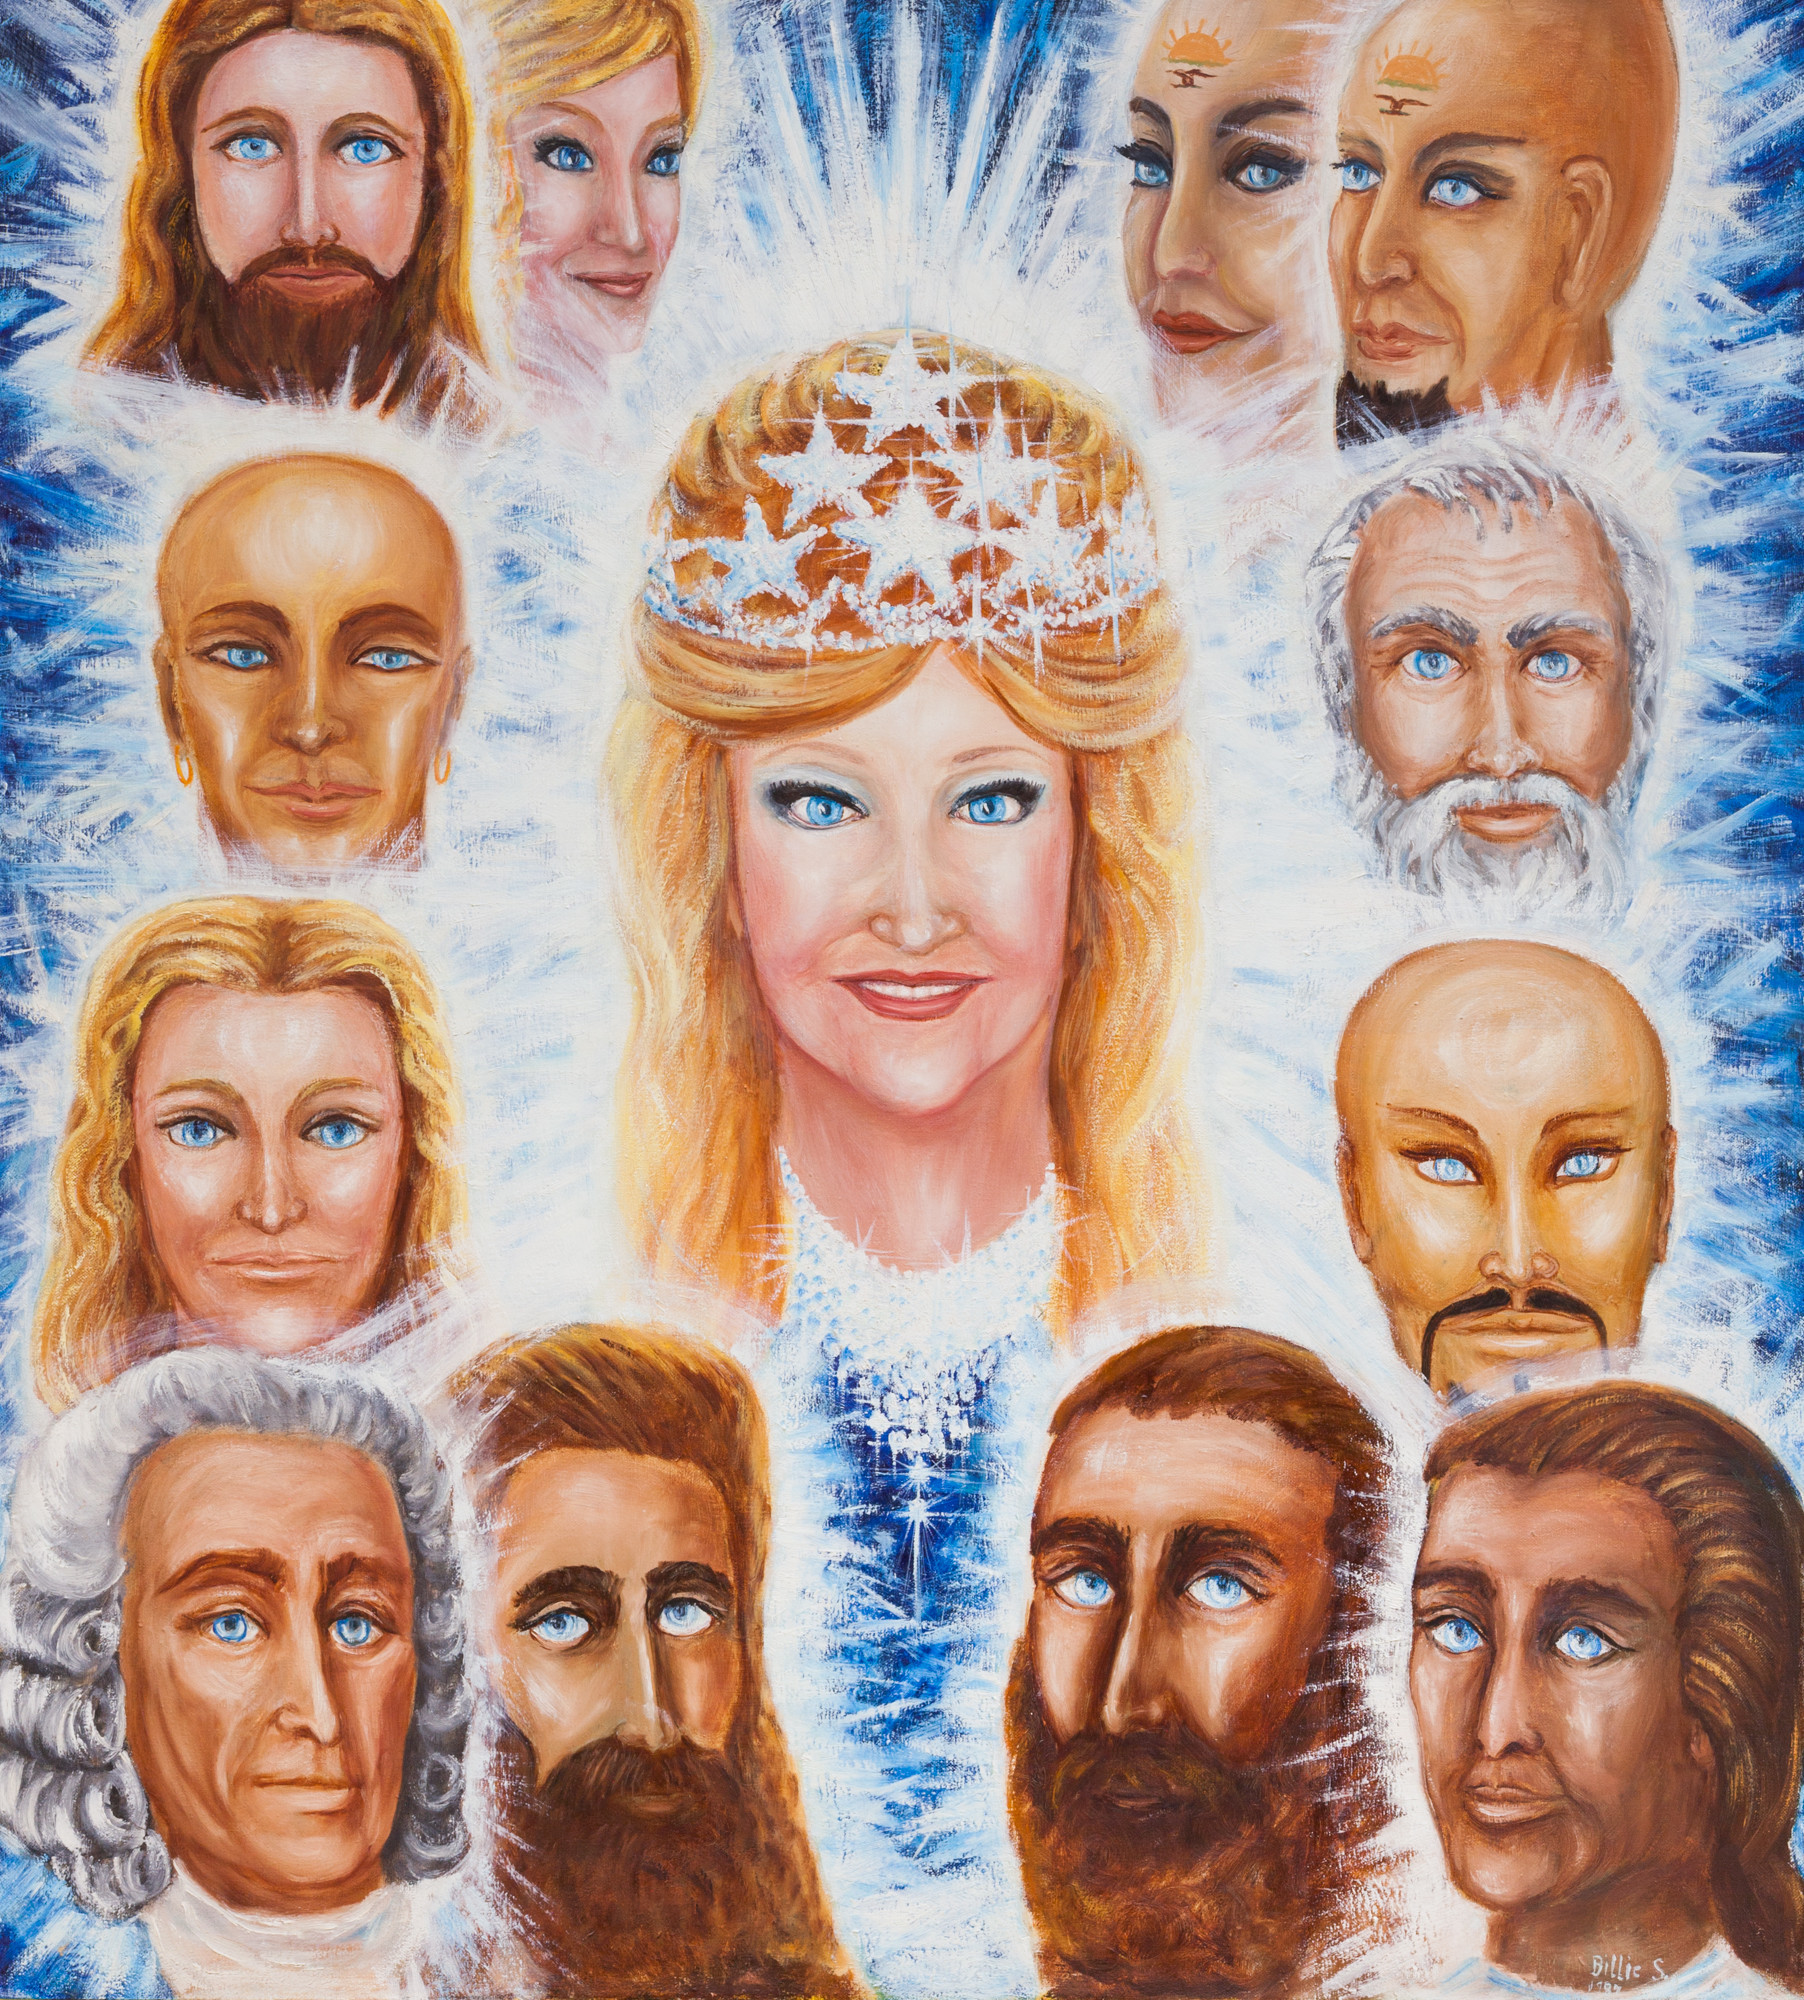 "Uriel and the Lemurian Masters," 1989, from the Unarius Academy of Science.